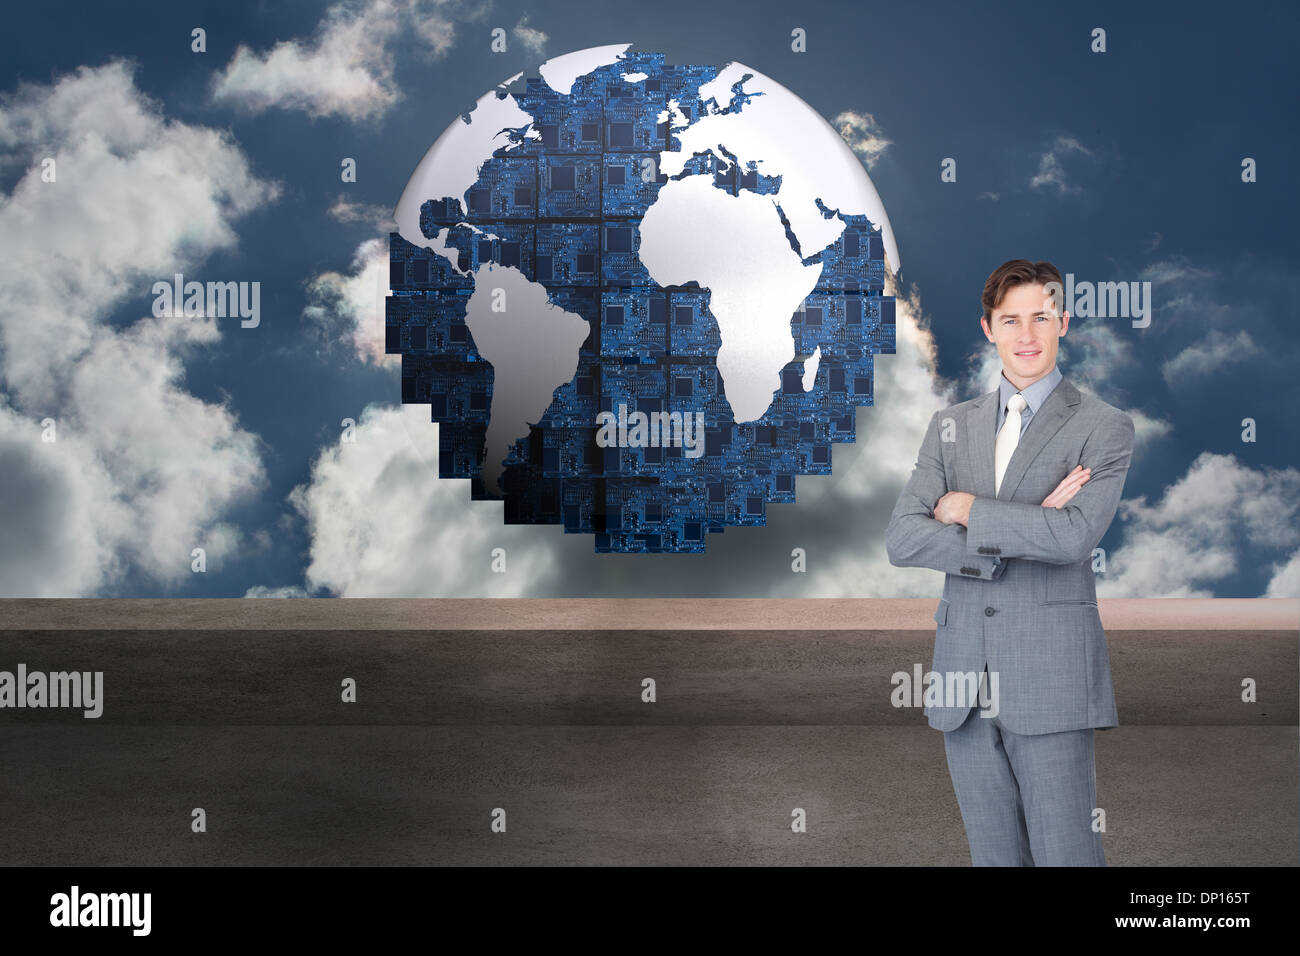 Composite image of assertive businessman standing Stock Photo